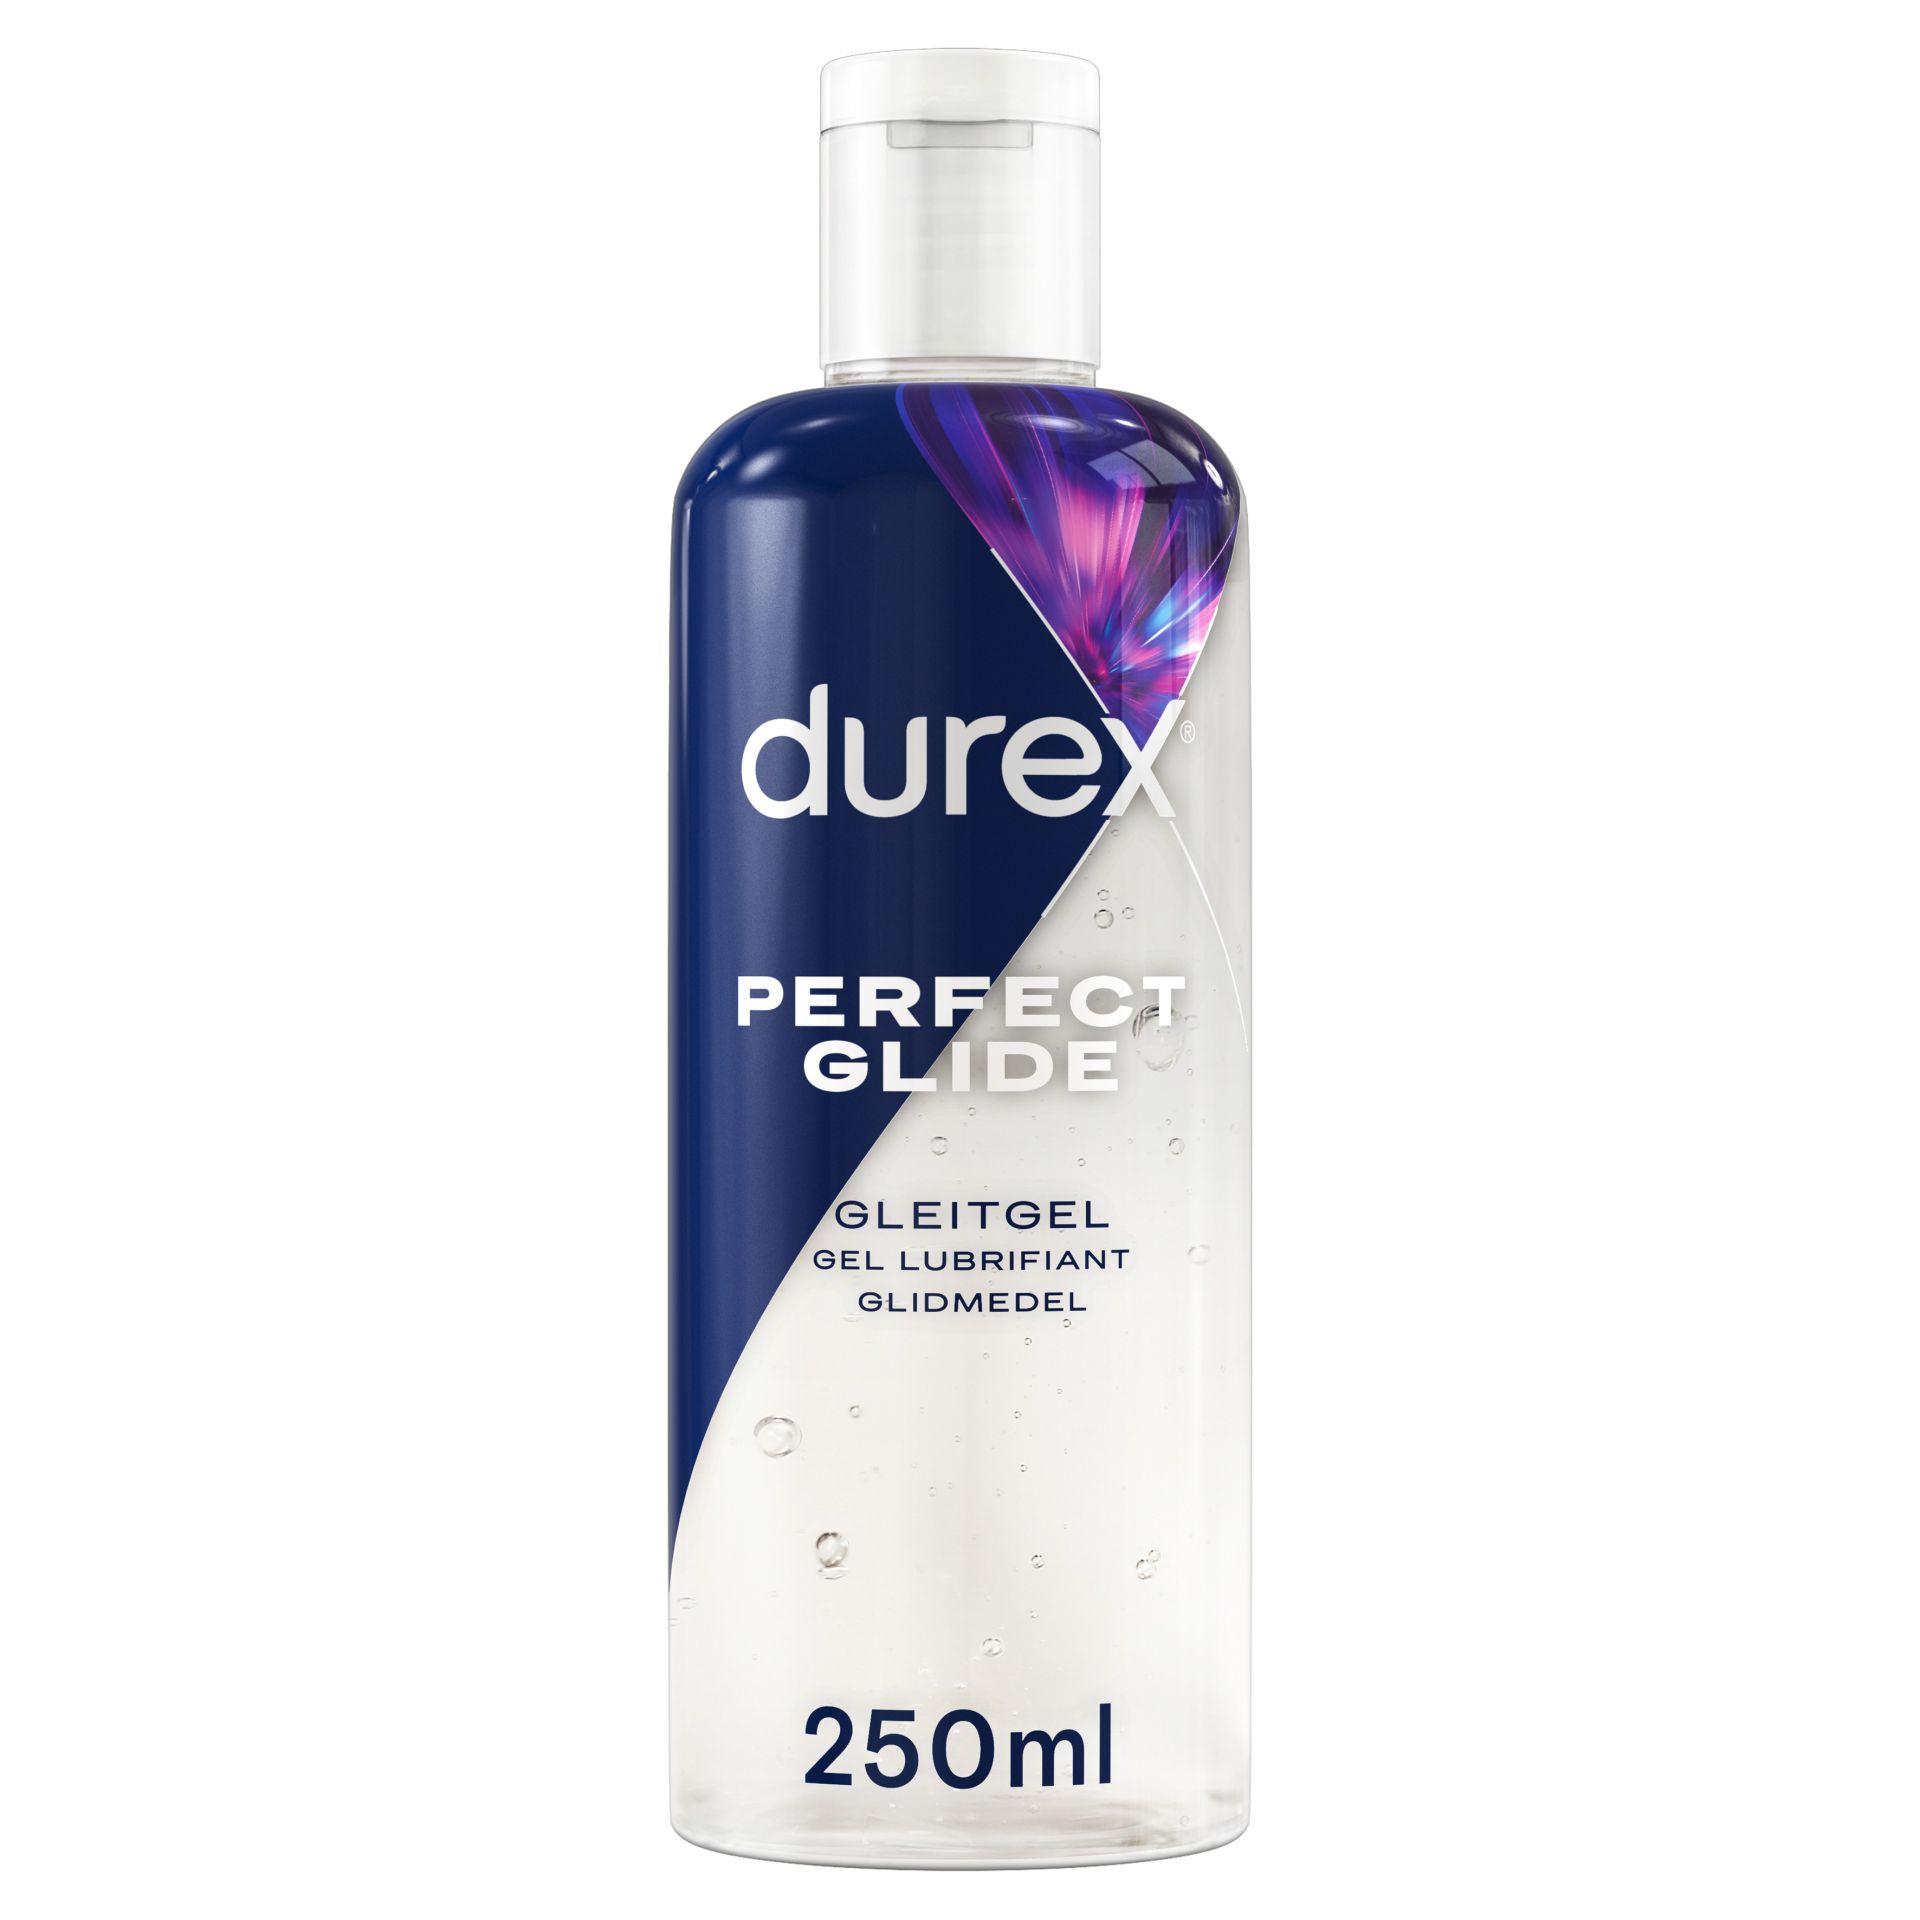 Durex Perfect Glide Lubricant, Silicone Based Anal Sex Lubricant, 250 ml